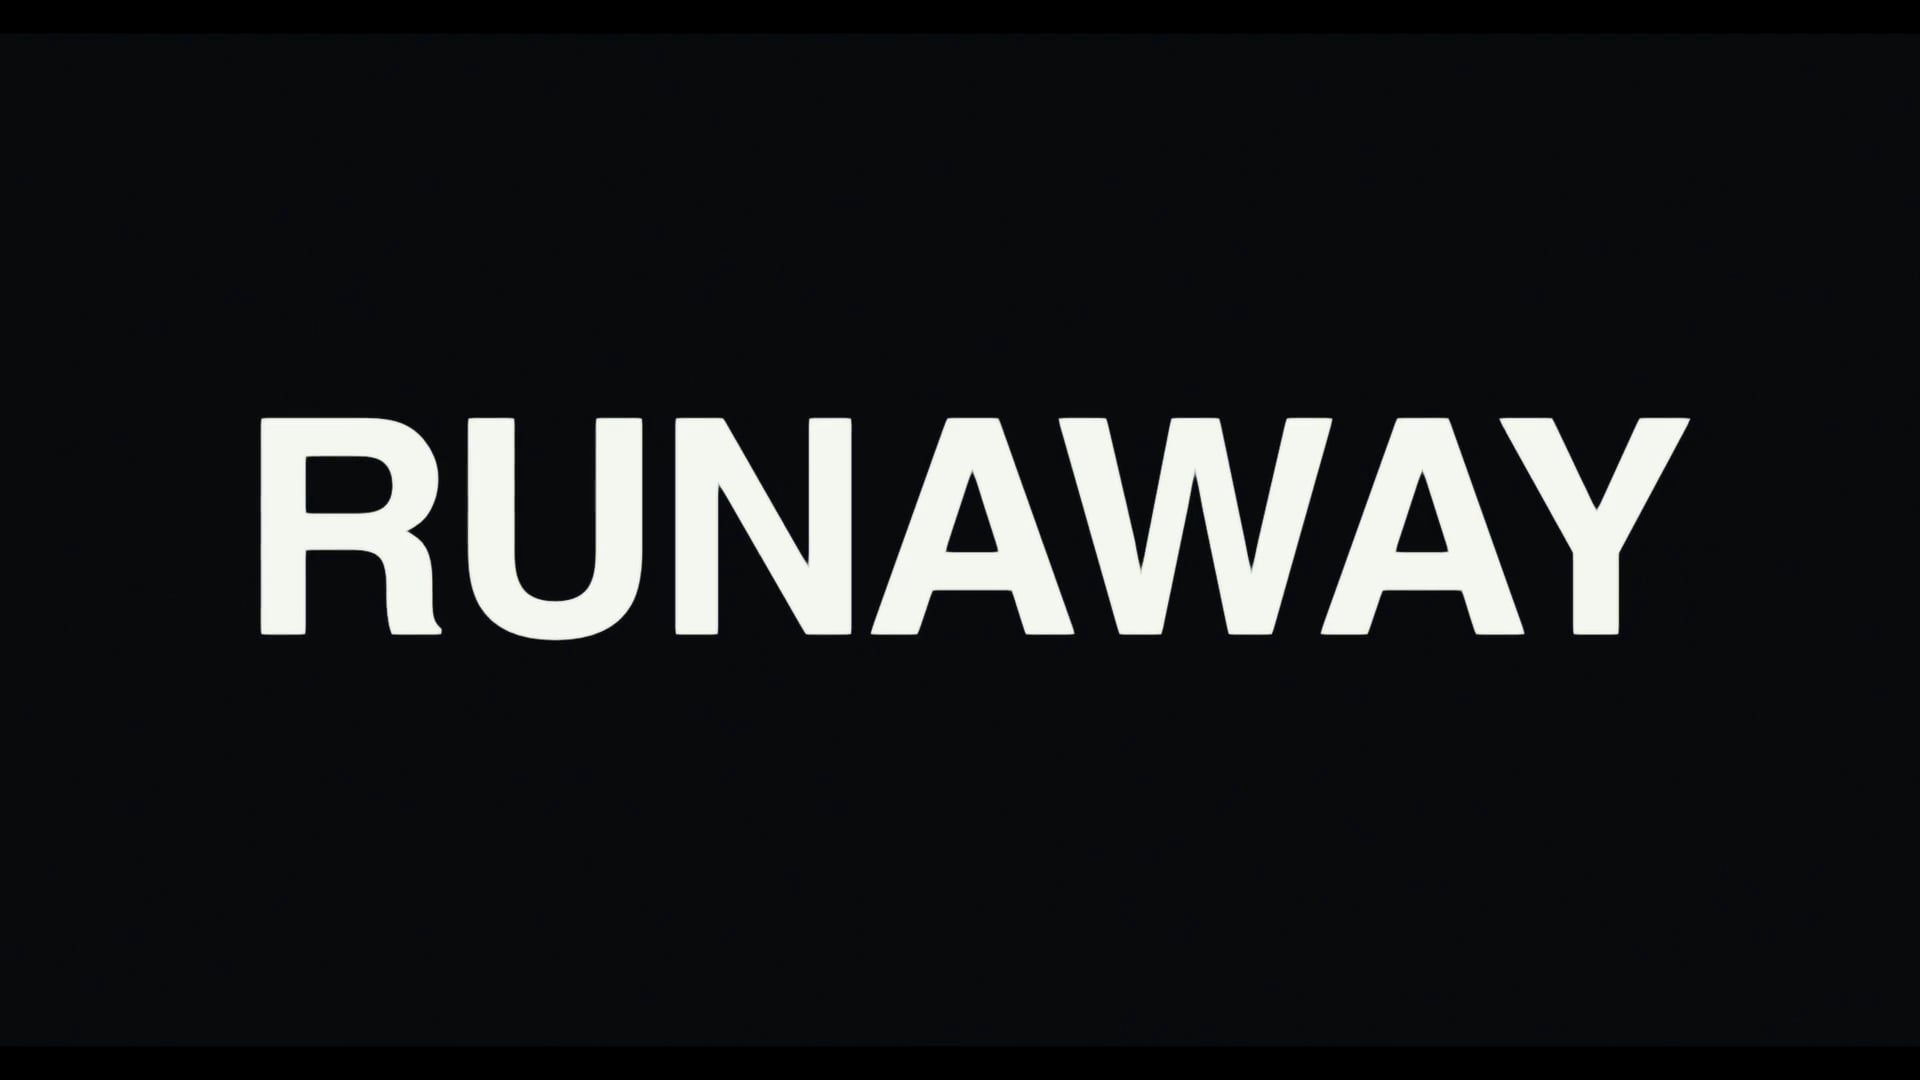 RUNAWAY - A Short Film by Sylvia Saether on Vimeo